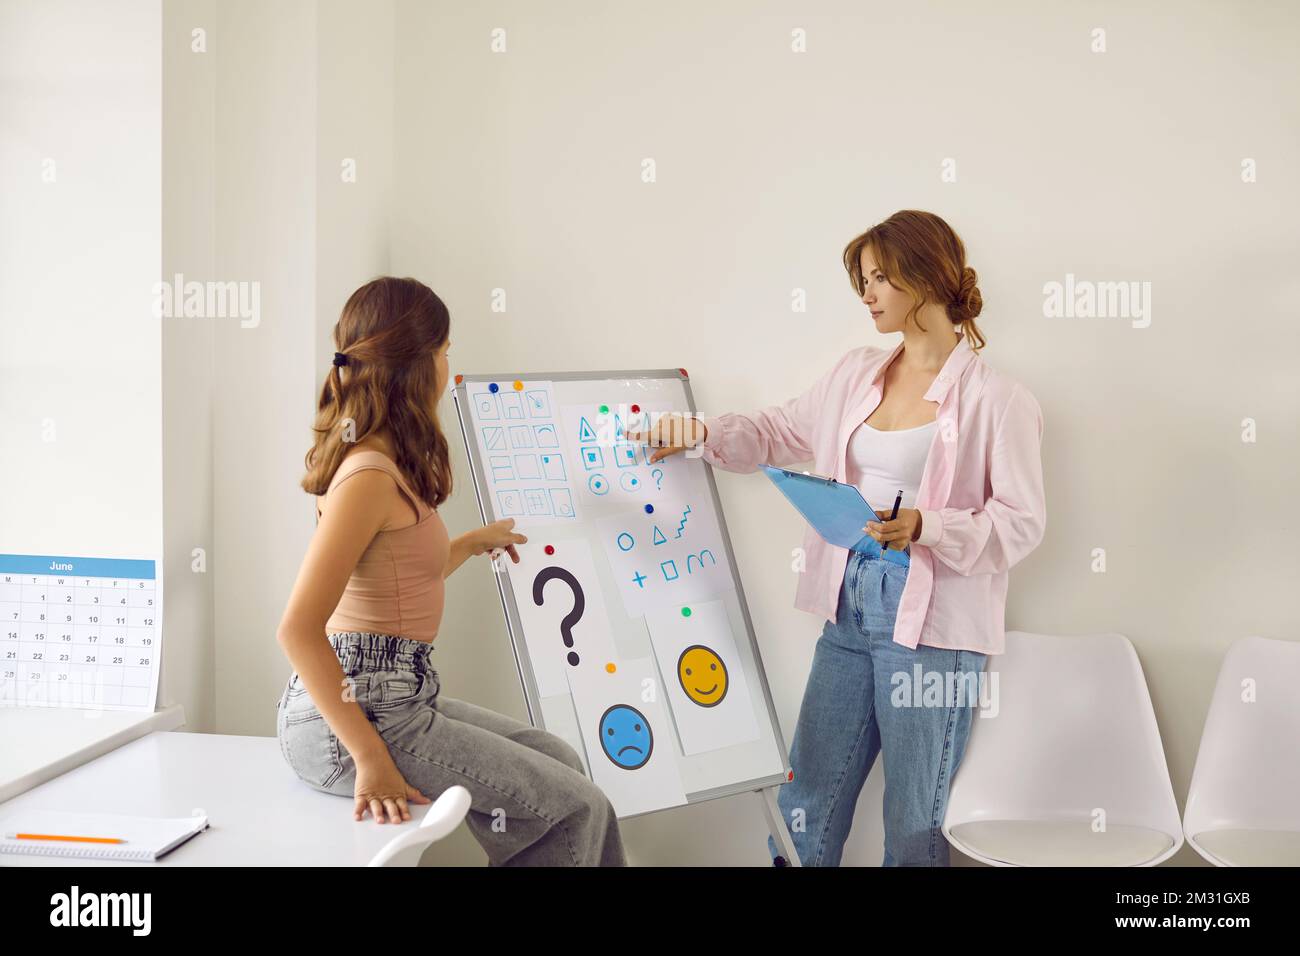 Professional female psychologist tells teenage girl more about psychology using white board. Stock Photo